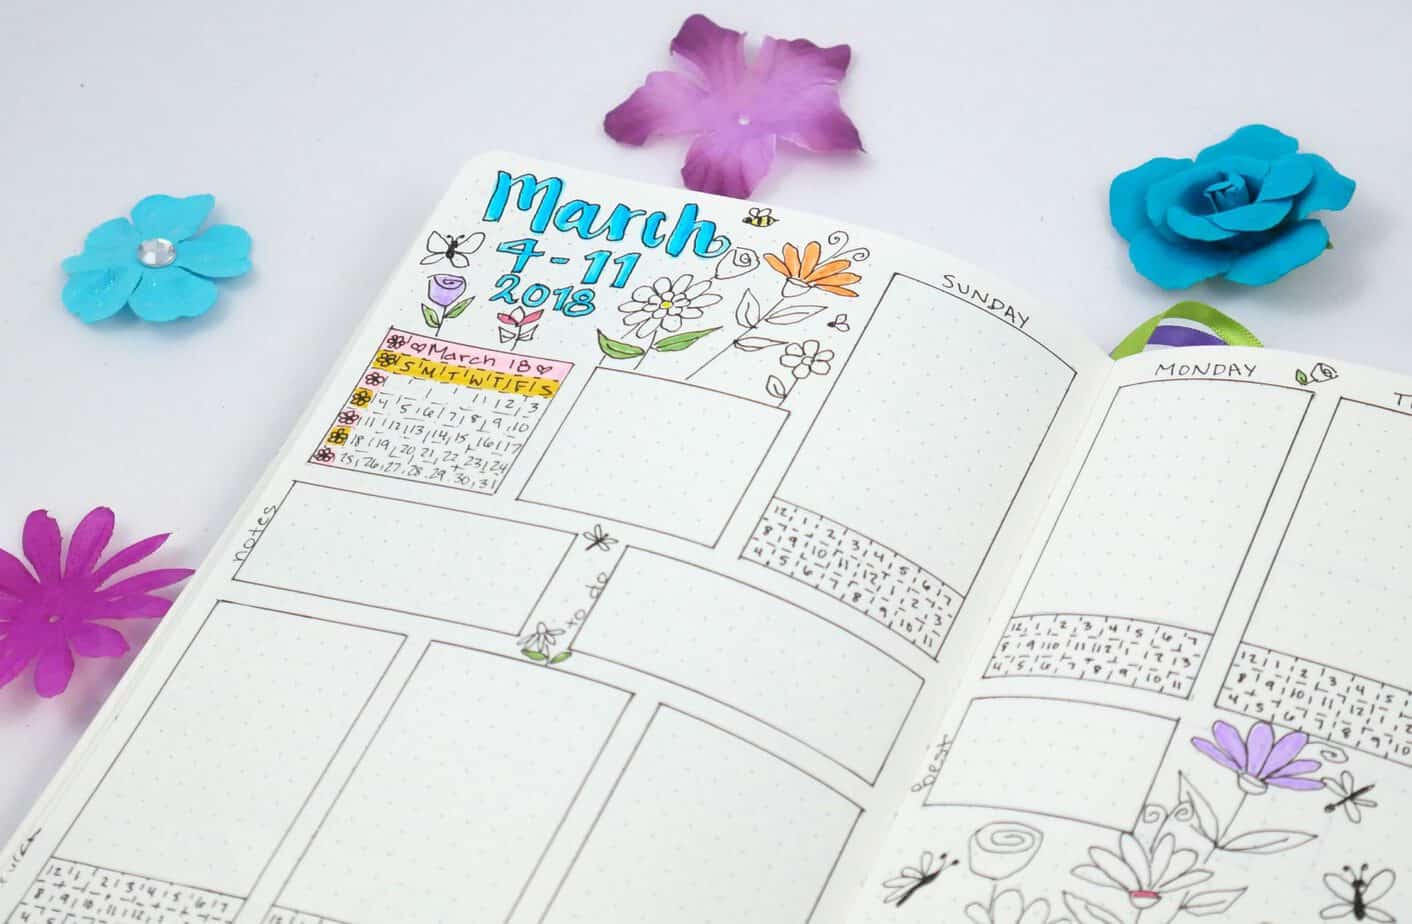 How make CUTE PAPER NOTES for your NOTEBOOK or BULLET JOURNAL - Frame Ideas